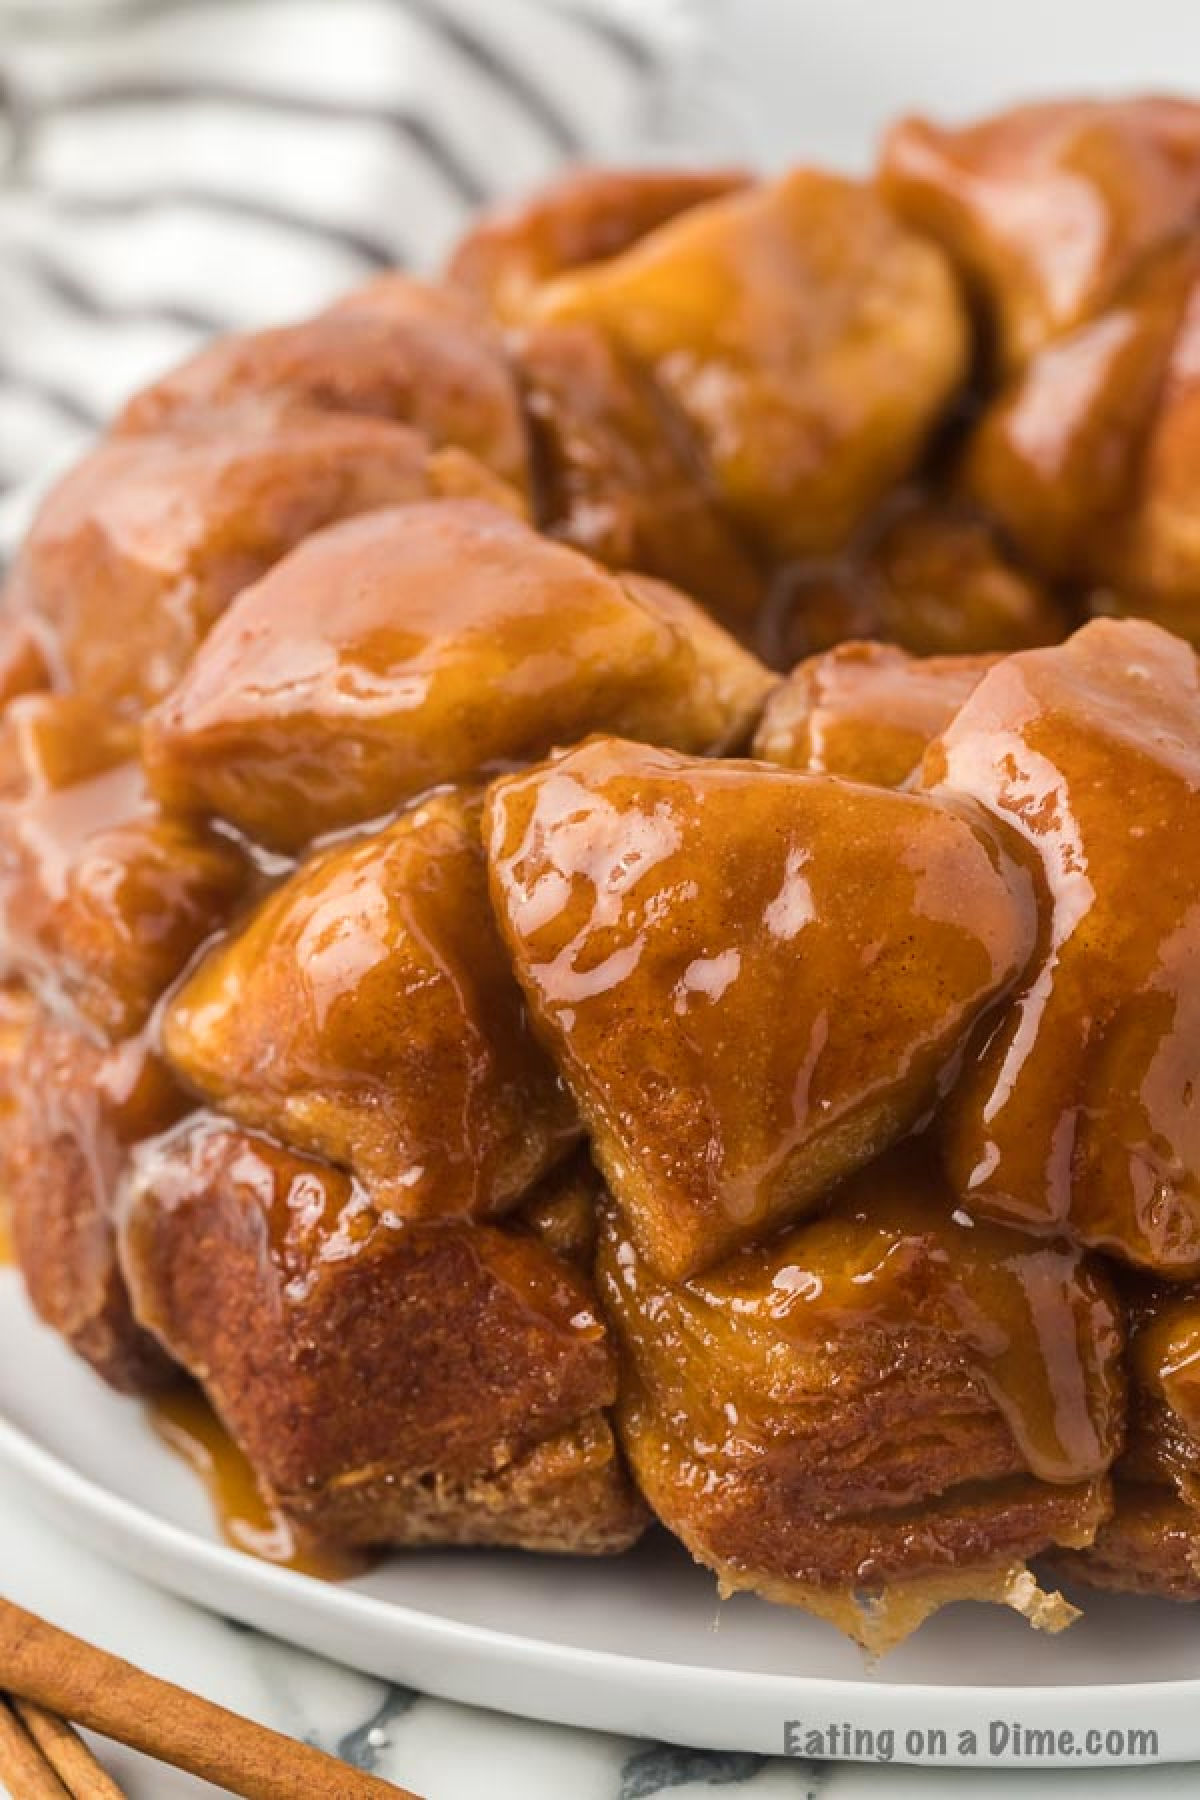 Easy Pull-Apart Monkey Bread Recipe • The Wicked Noodle